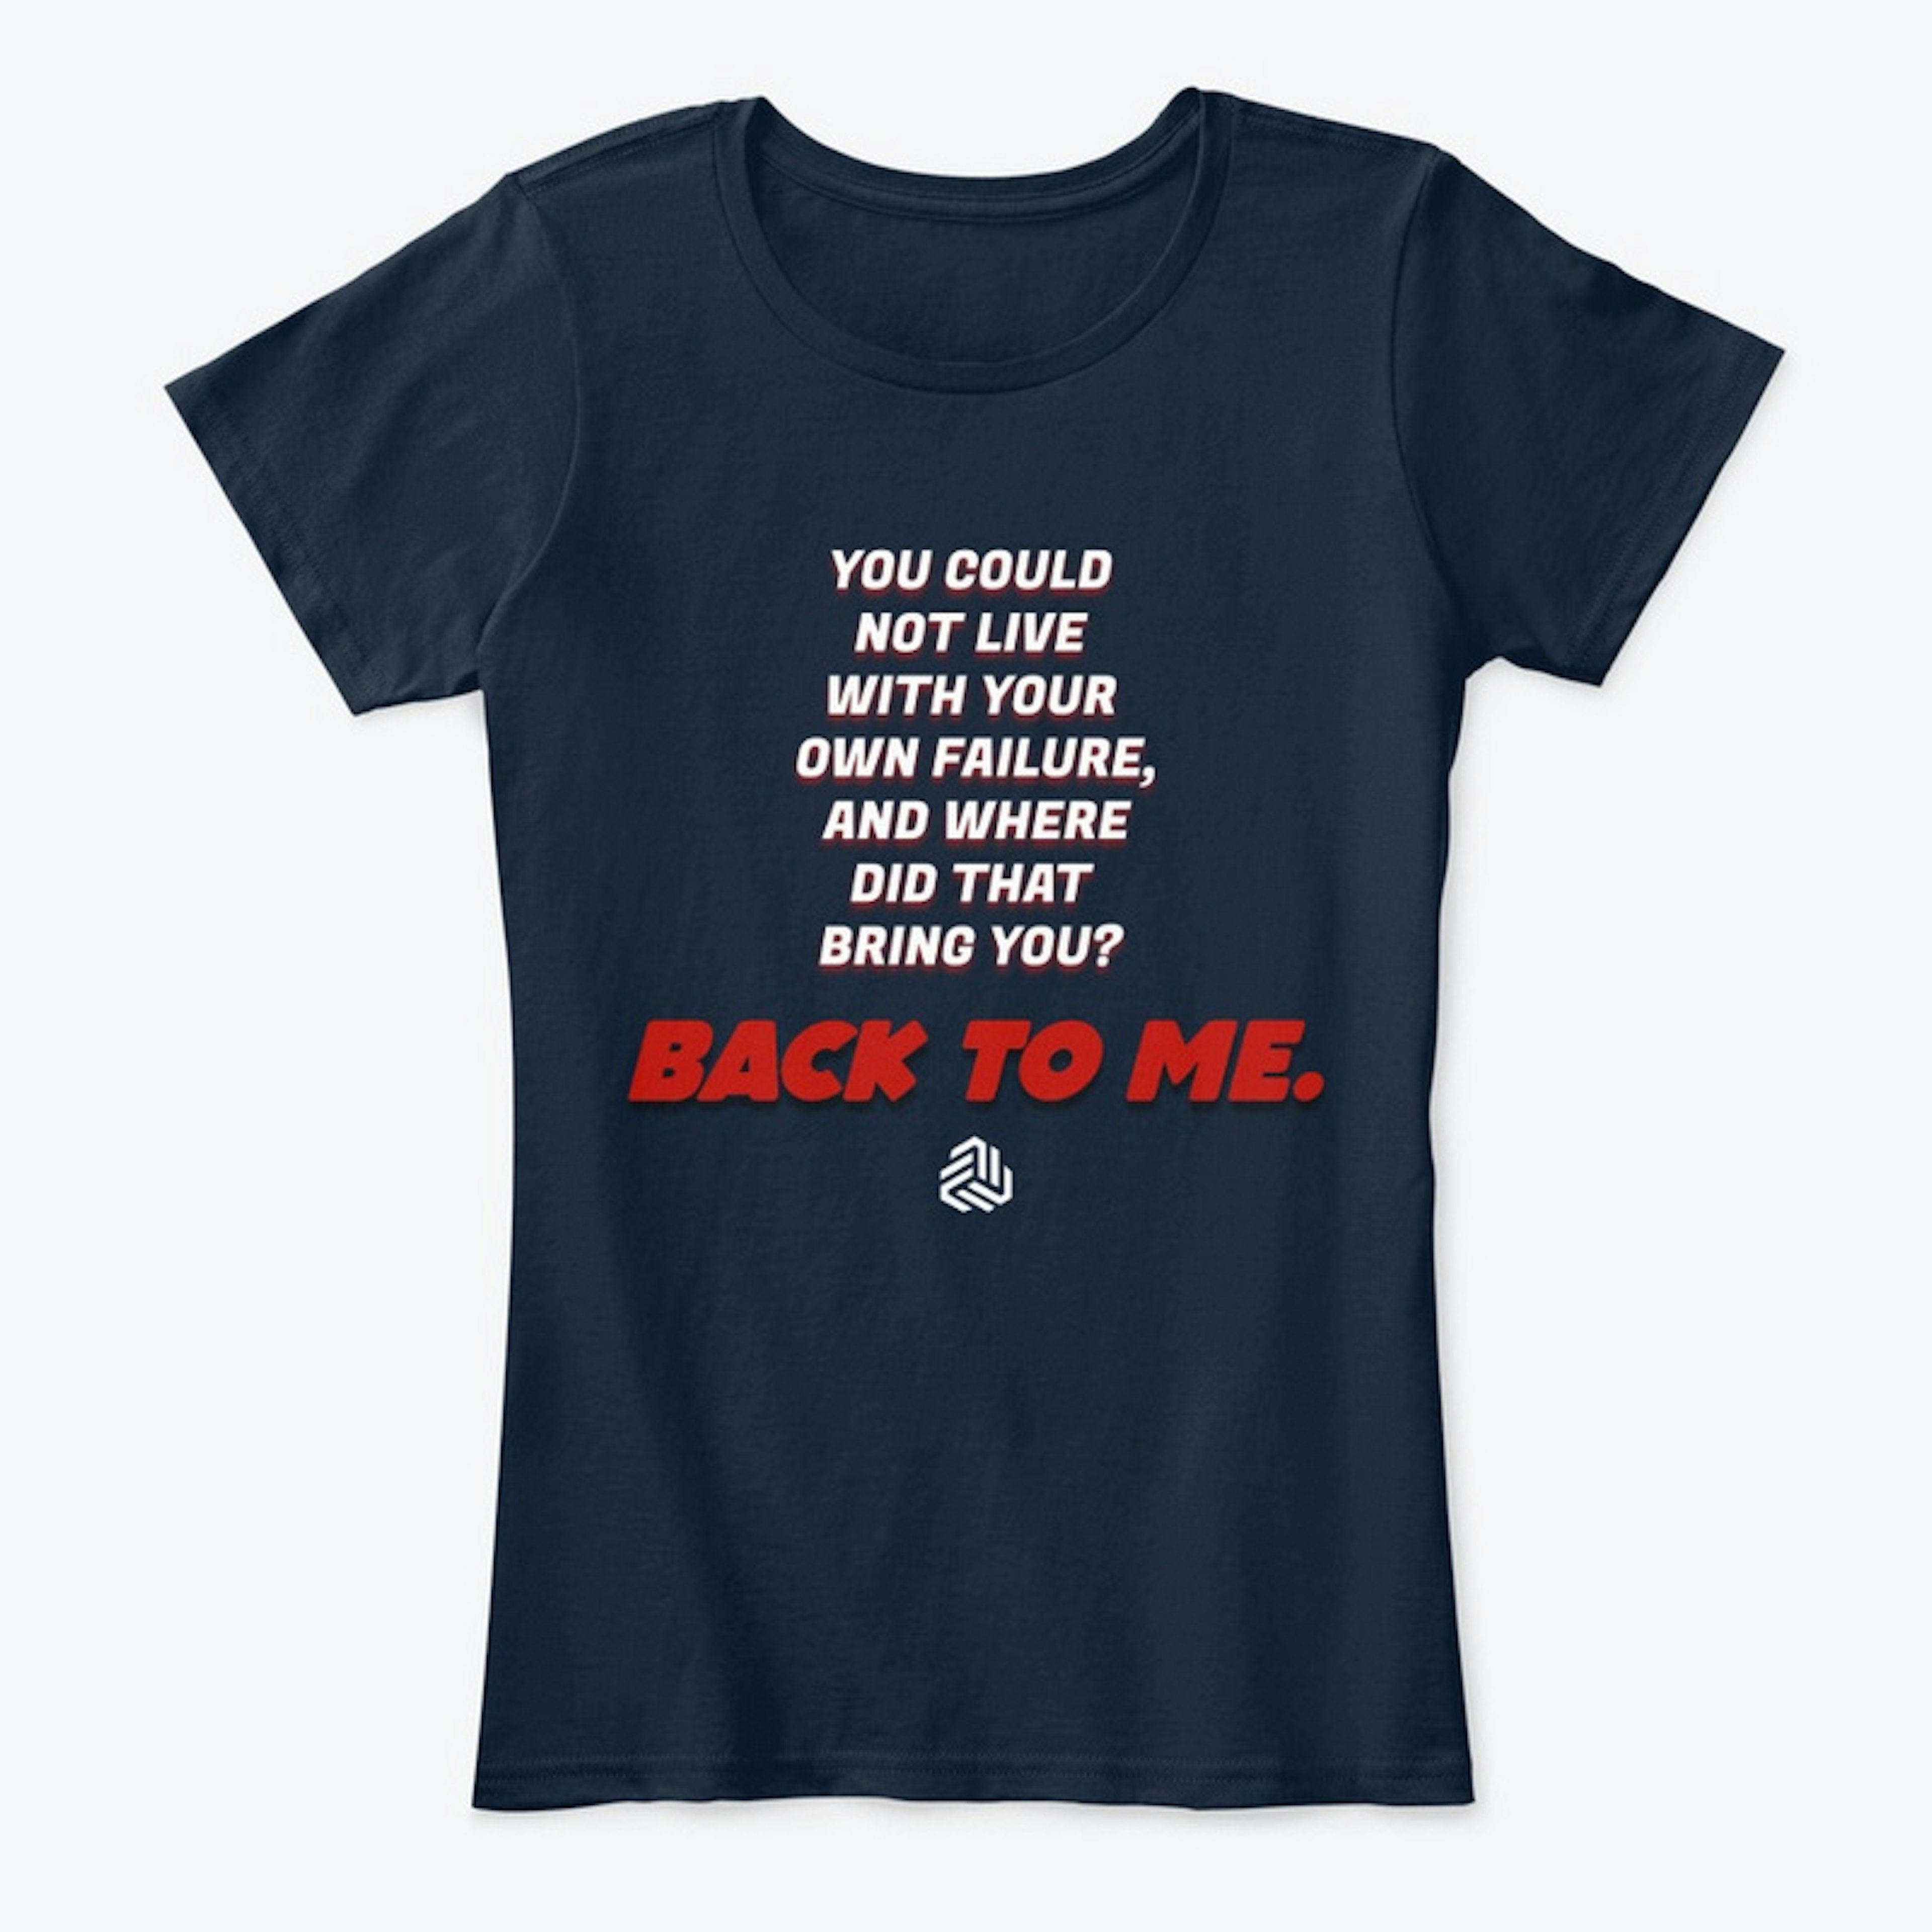 BACK TO ME: LIMITED EDITION